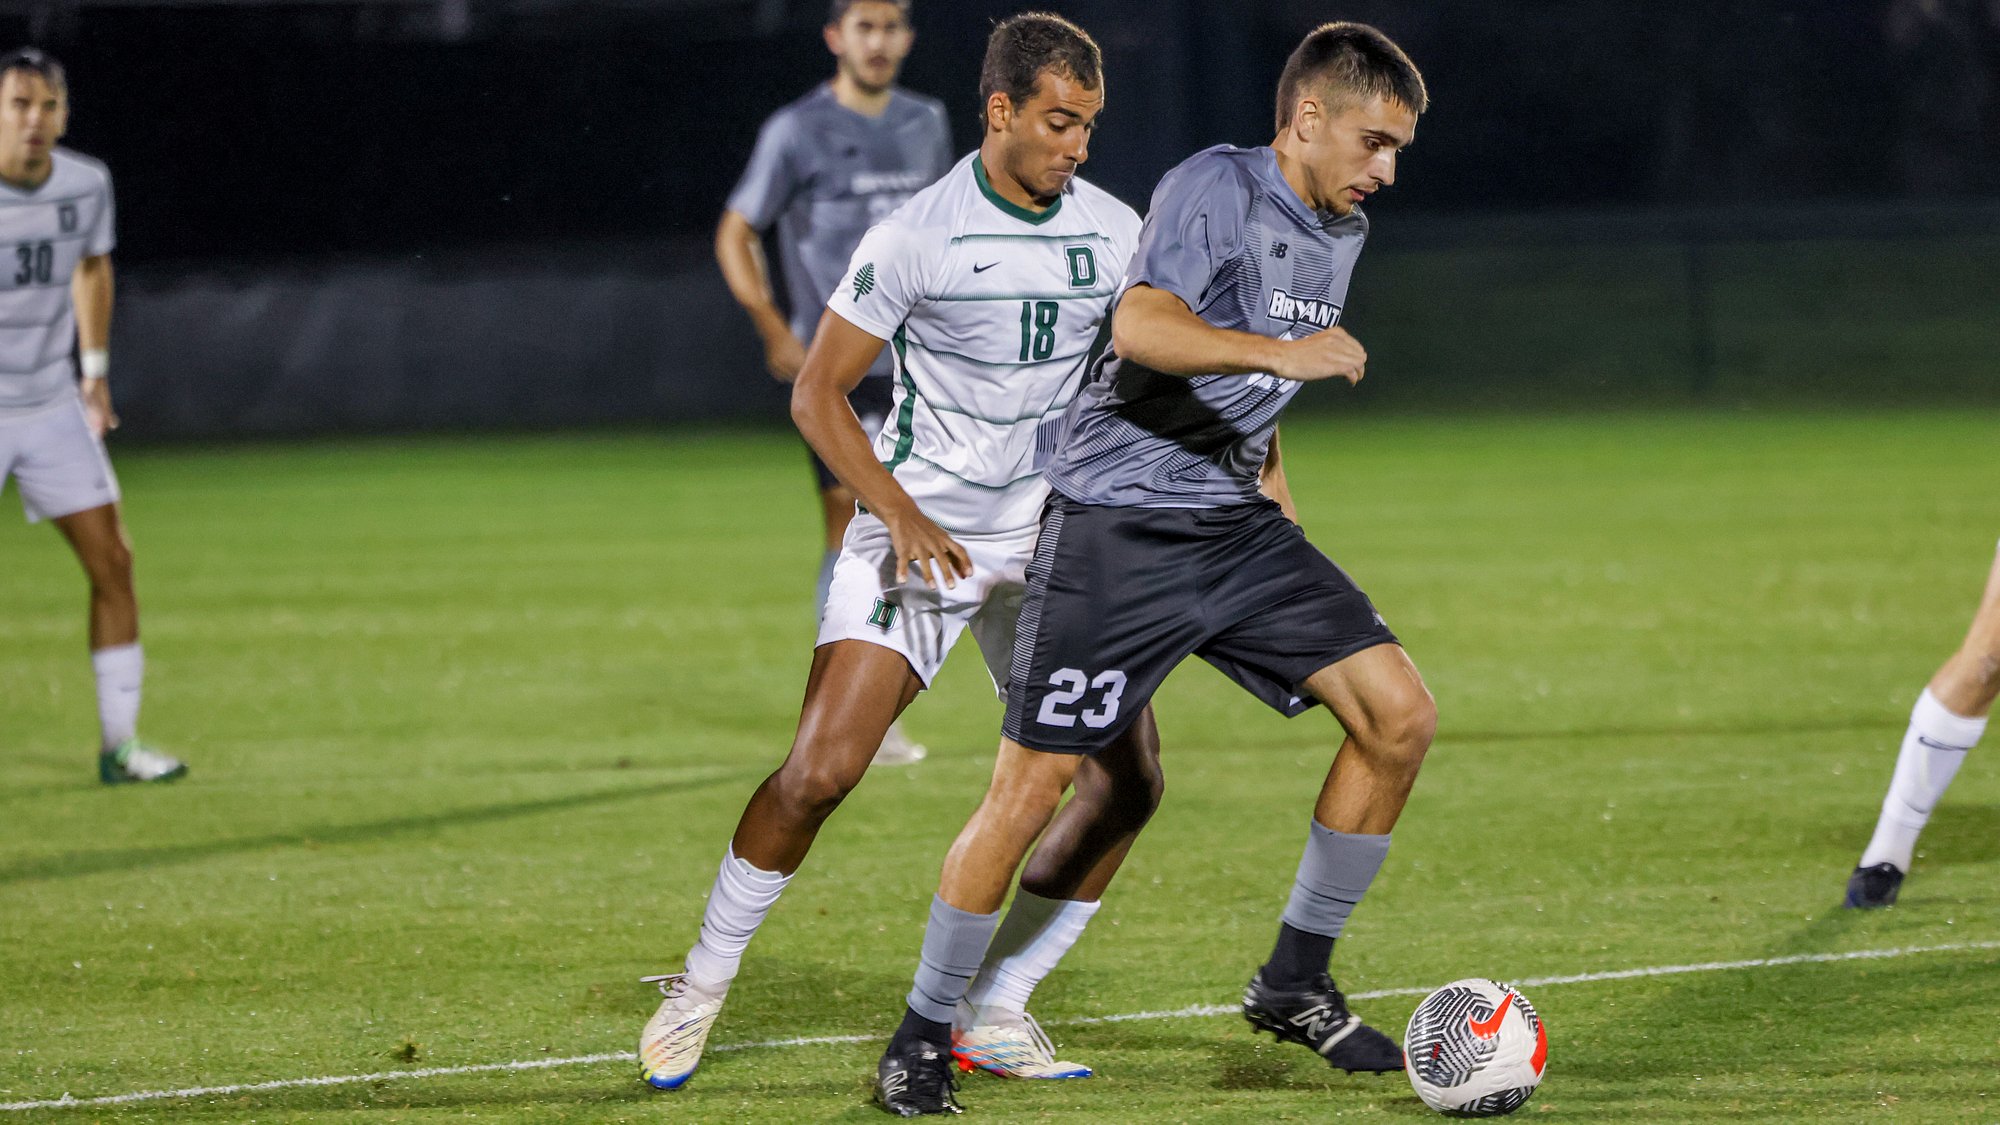 Dawgs come from behind to beat Dartmouth